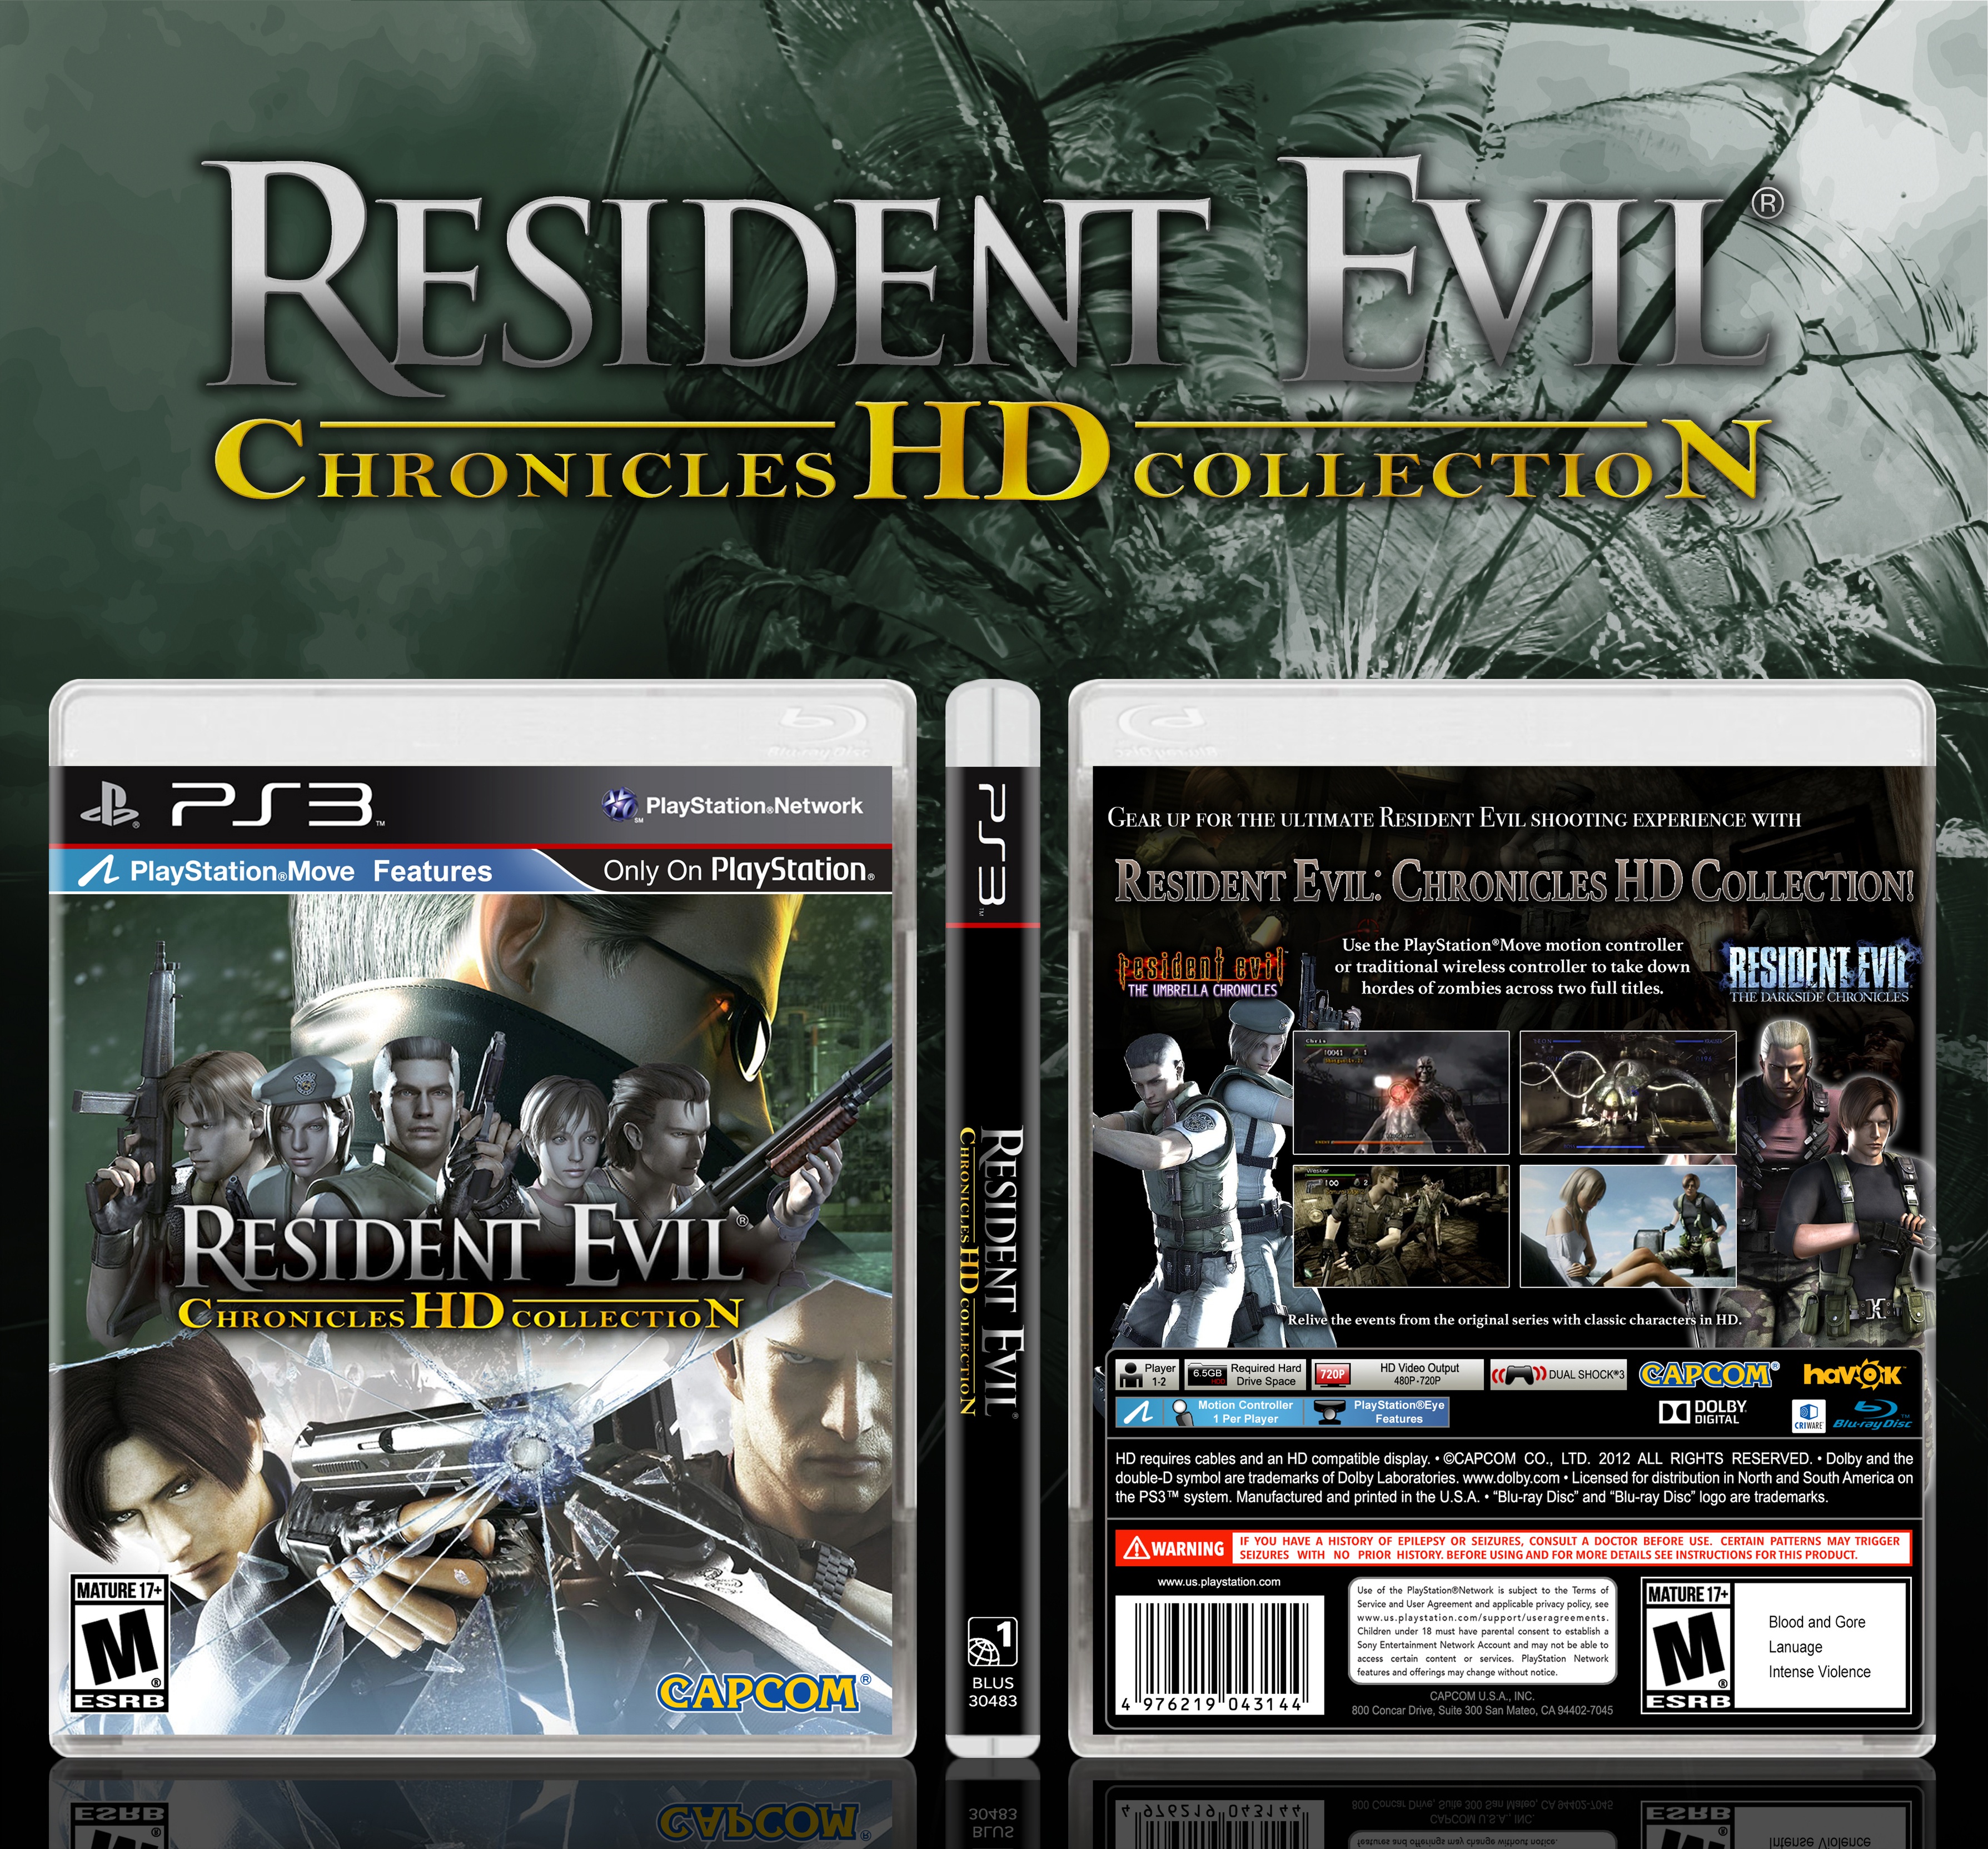 Resident Evil Chronicles HD Collection box cover